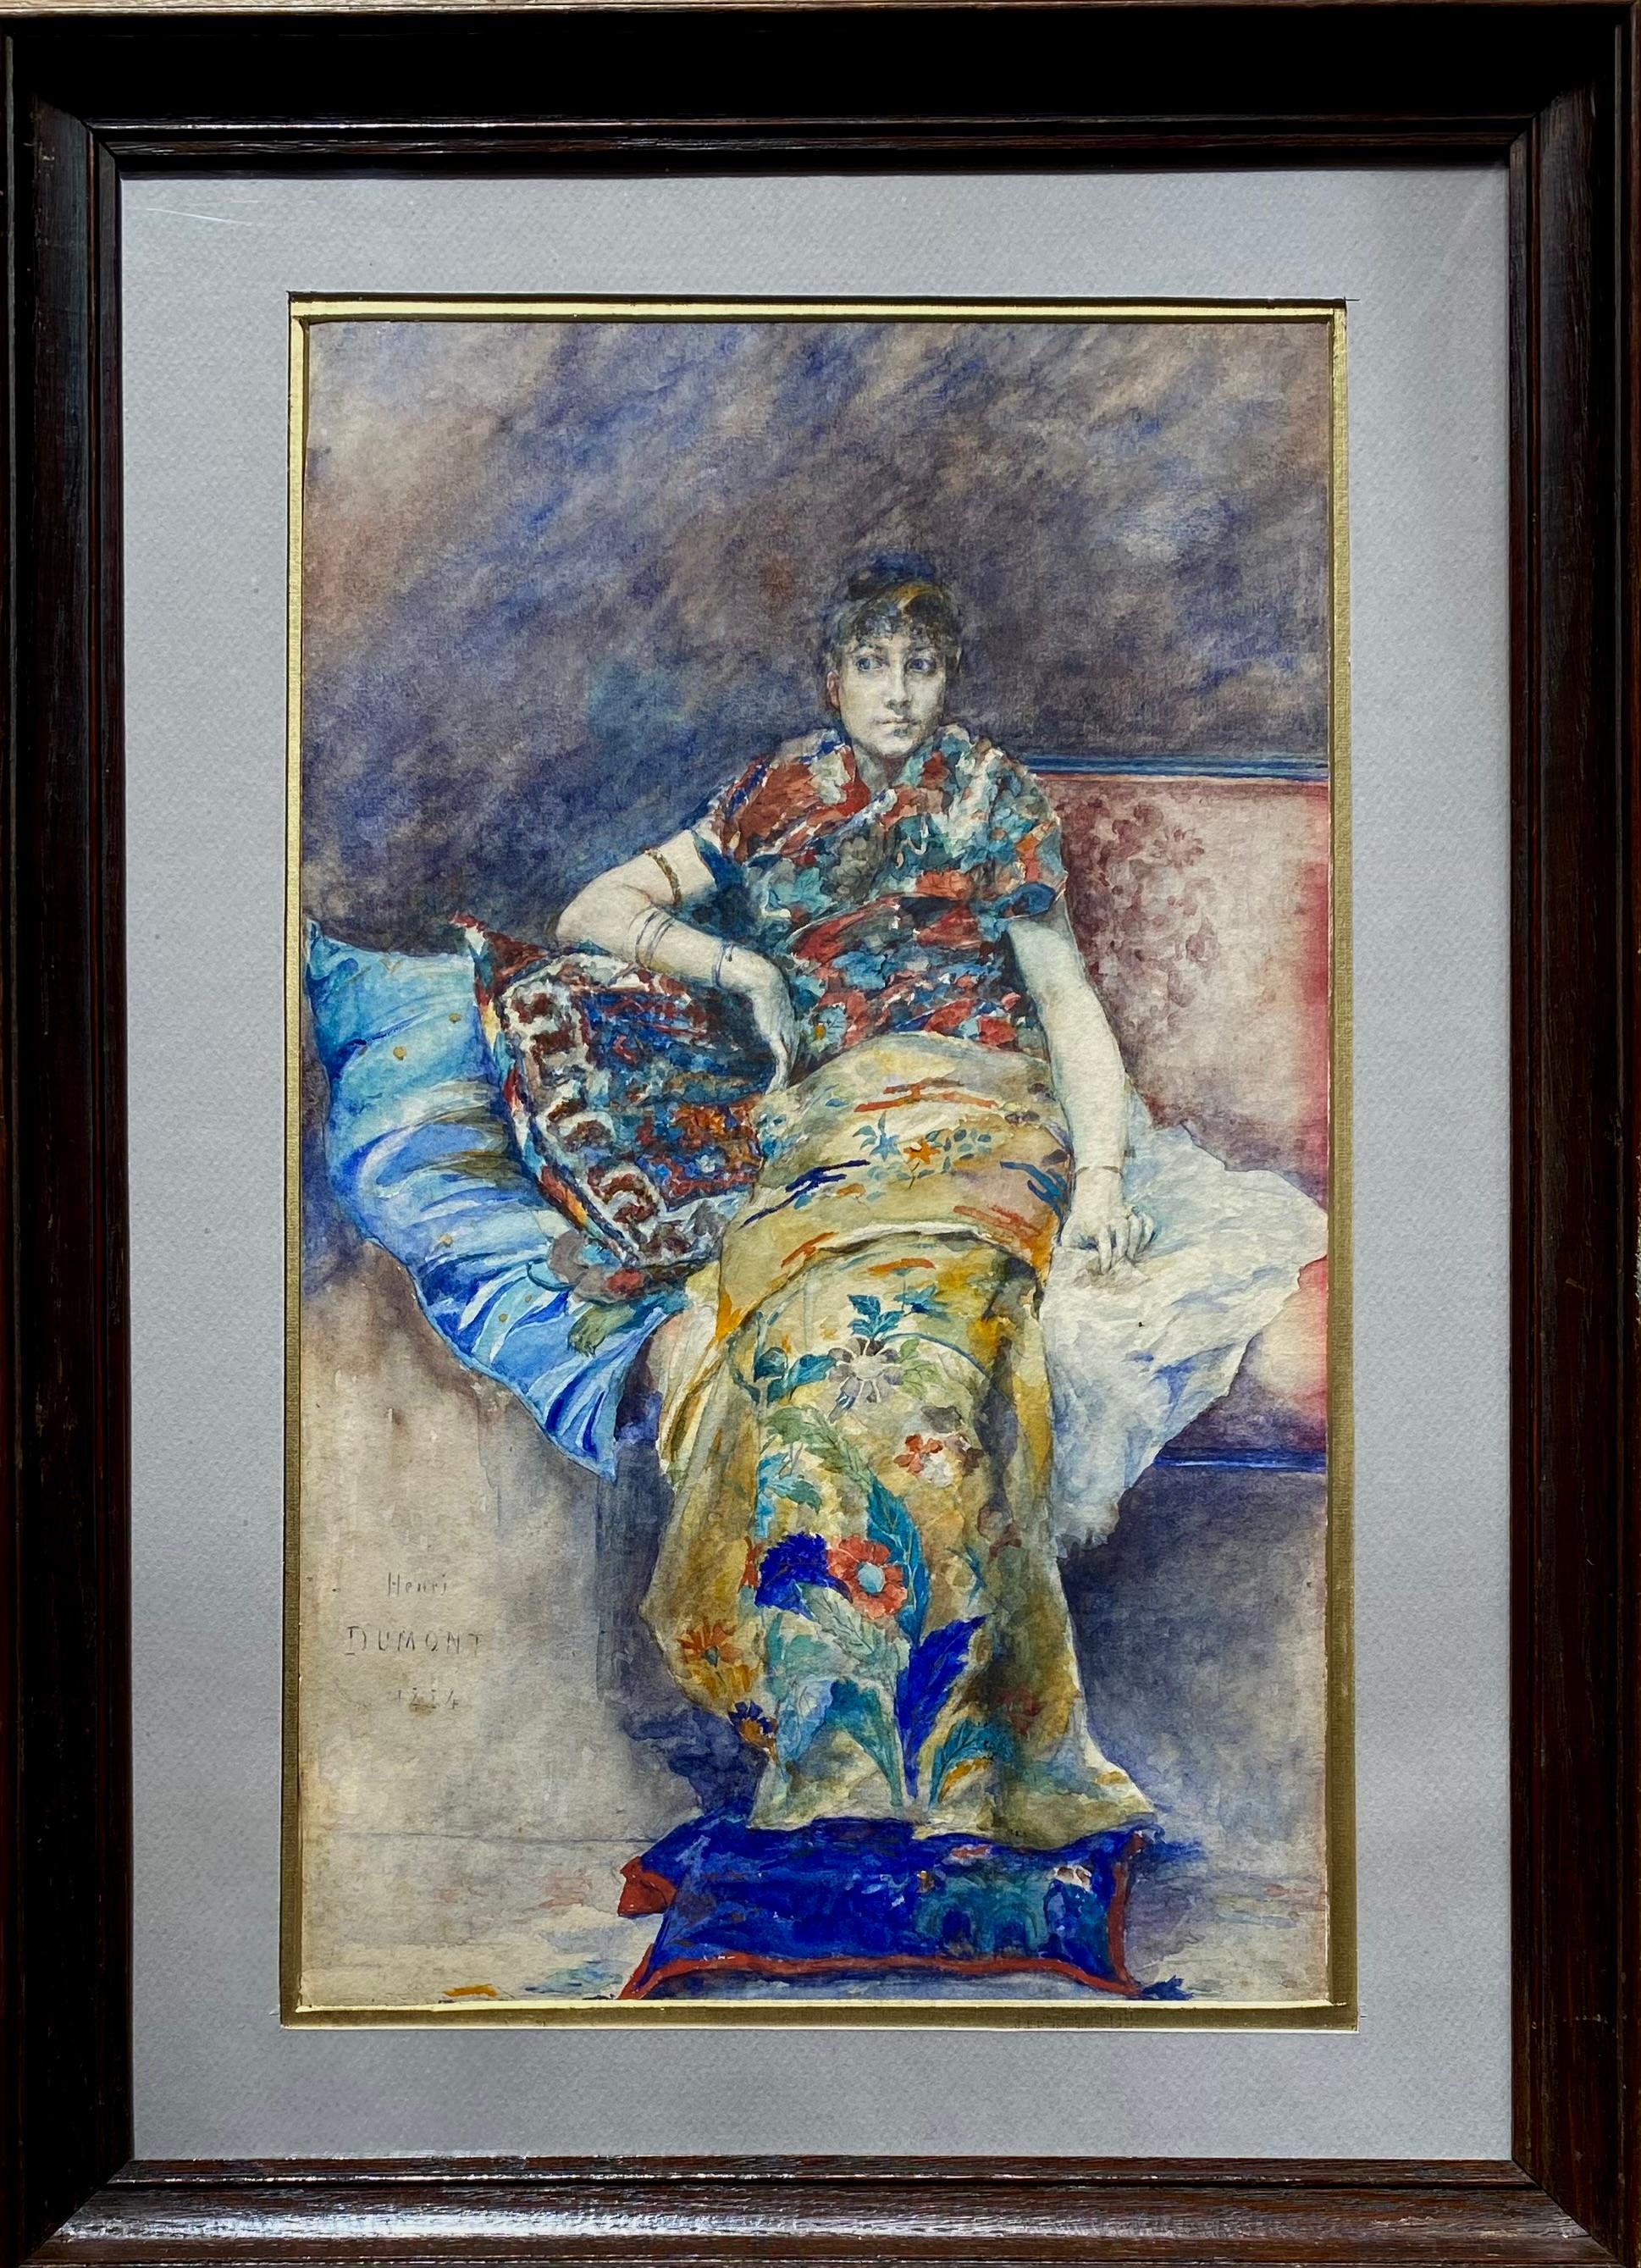 Henri Courselles-Dumont Portrait – Woman in japonist dress seated on a sofa